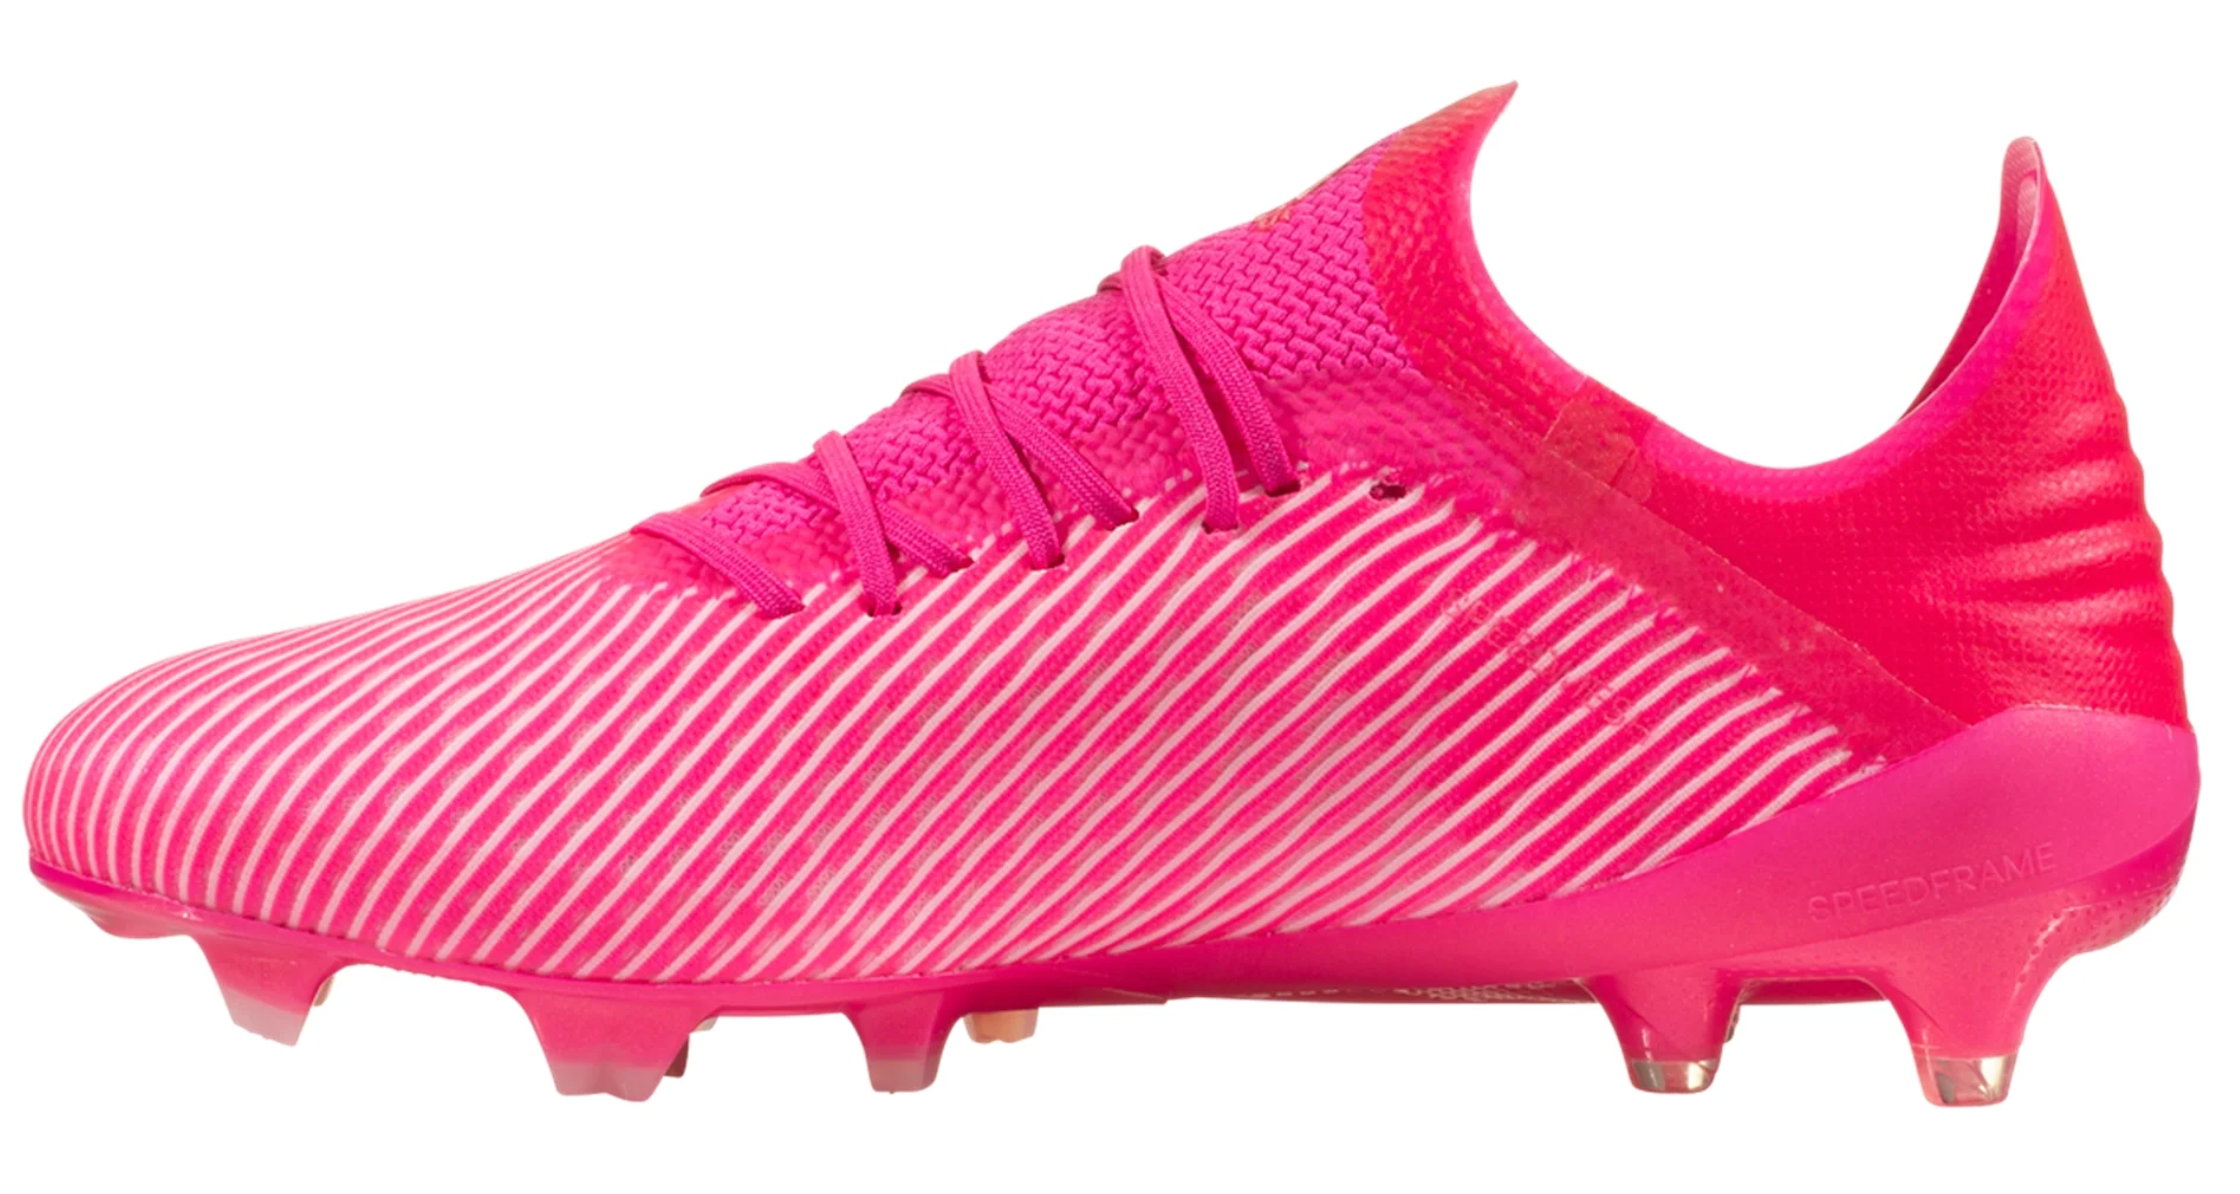 adidas cleats soccer pink